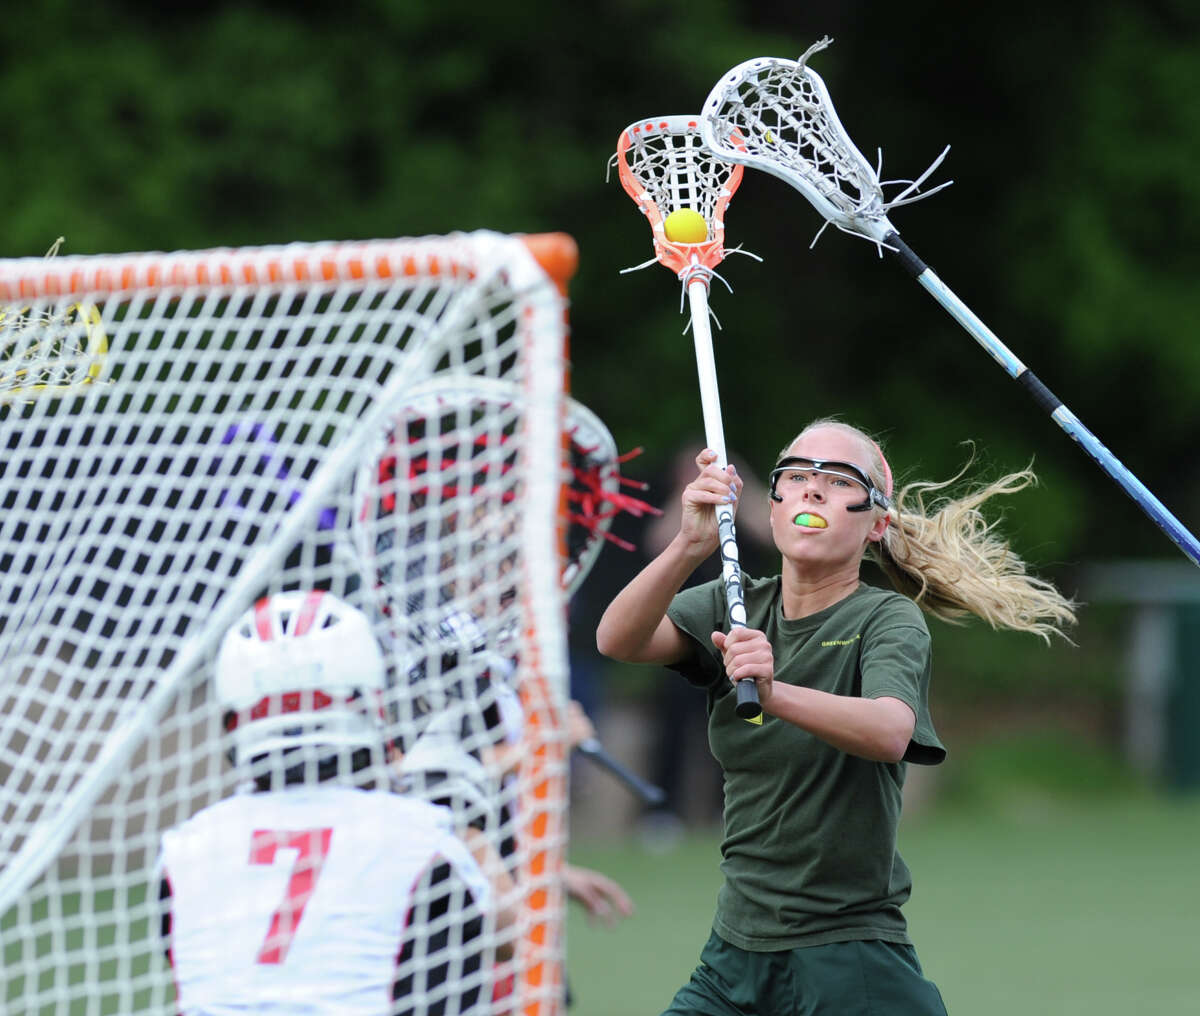 Emily Conway of Greenwich Academy attempts to line up a shot during girls high school lacrosse match between Rye High School and Greenwich Academy at Greenwich Academy, Saturday afternoon, May 5, 2012. Conway missed on her shot attempt as Rye went on to defeat GA, 12-11.